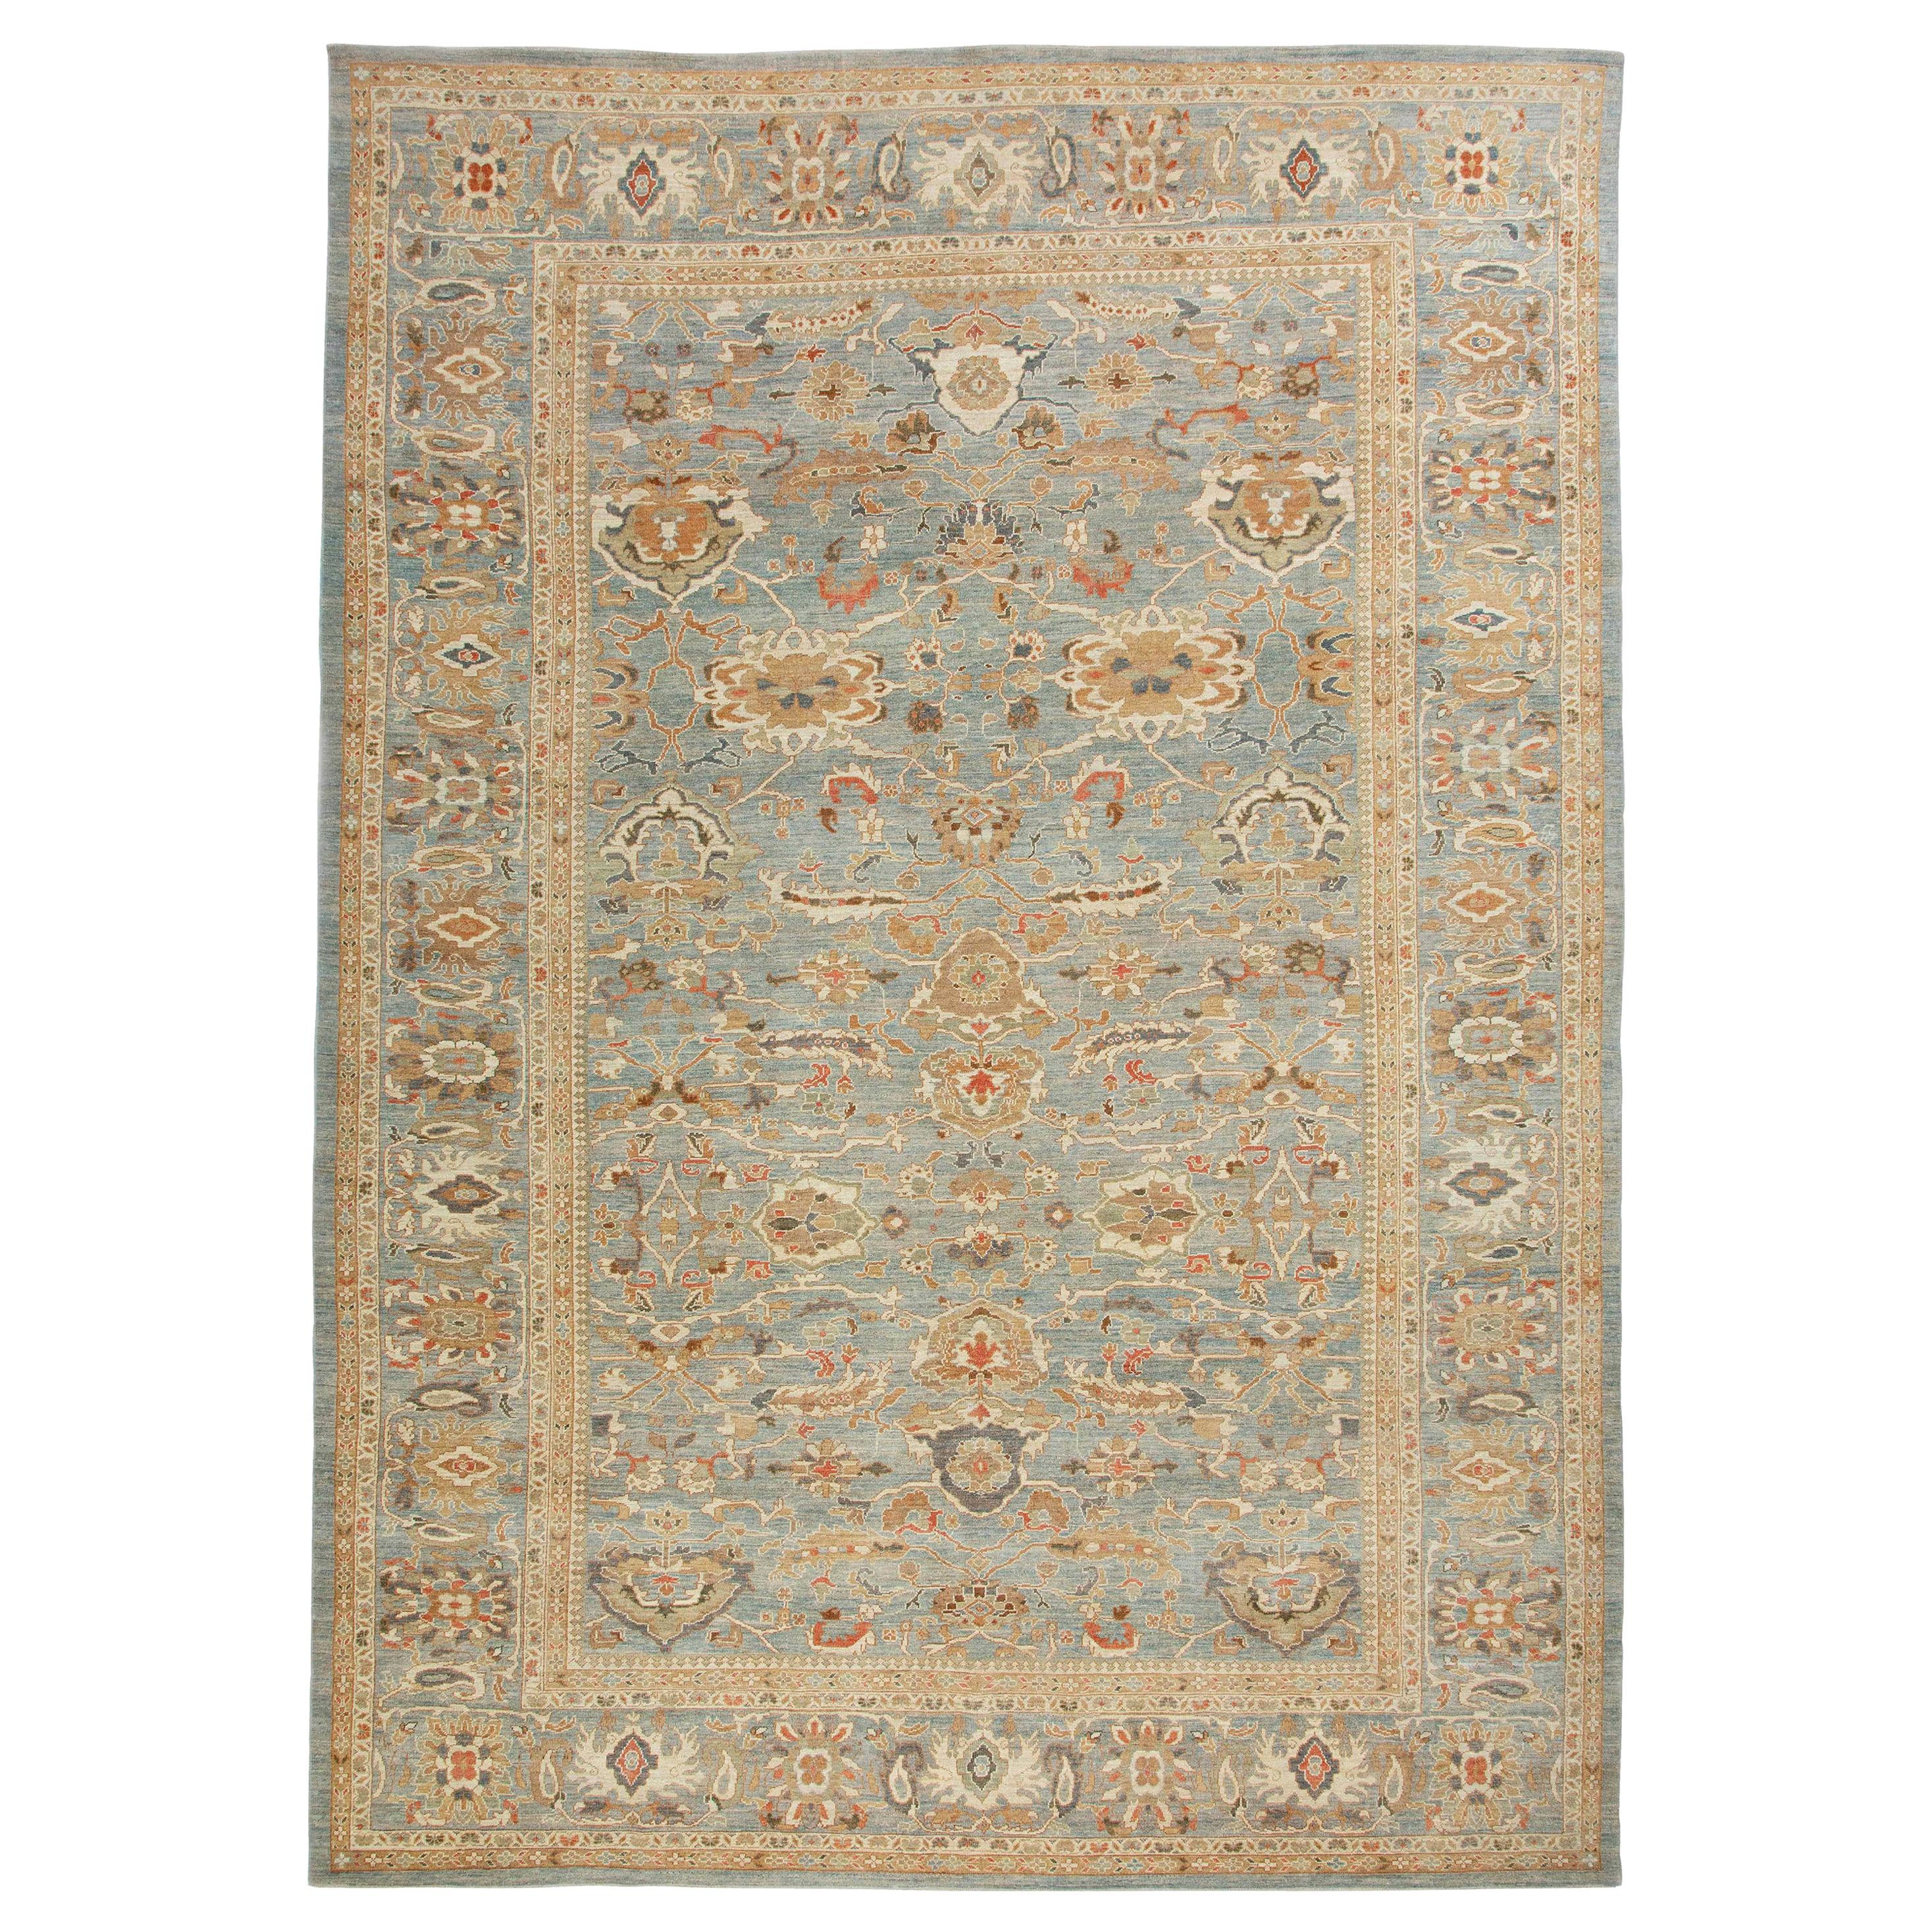 Oversize Turkish Sultanabad Style Rug with Blue Gray Floral Field